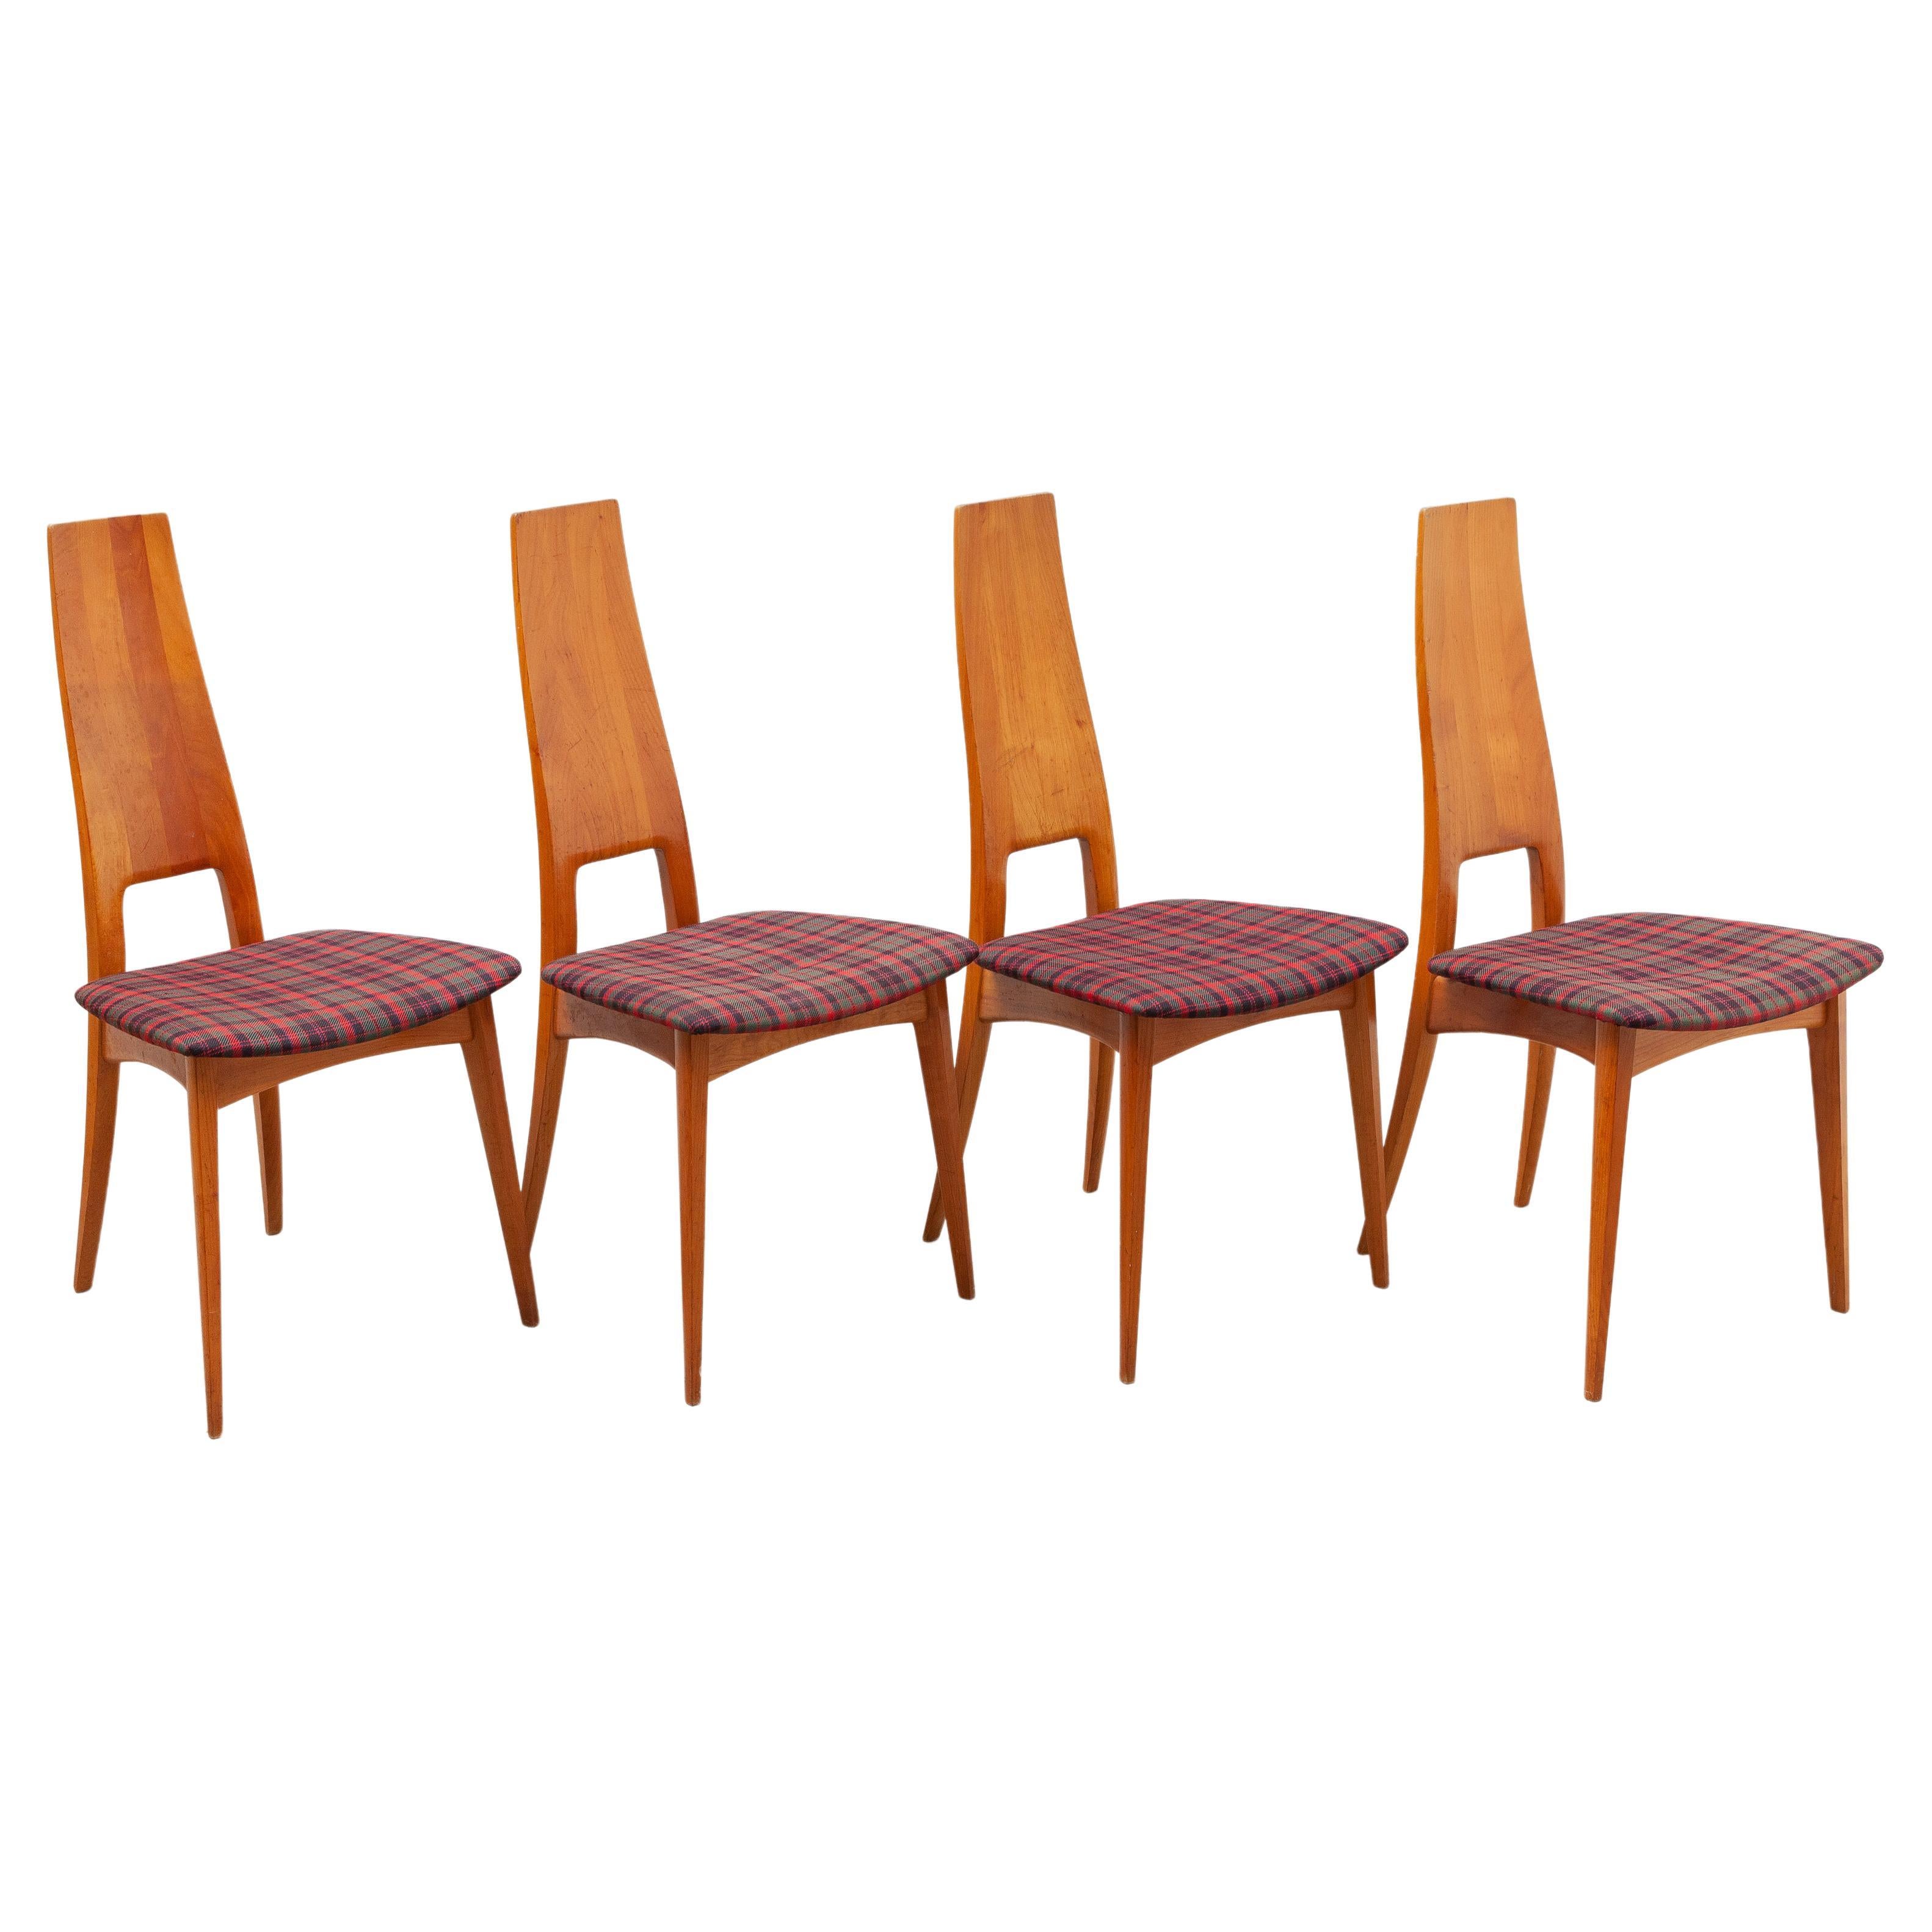 Set of Four High-Back Dining Chairs by Martin Dettinger, Germany, 1950s